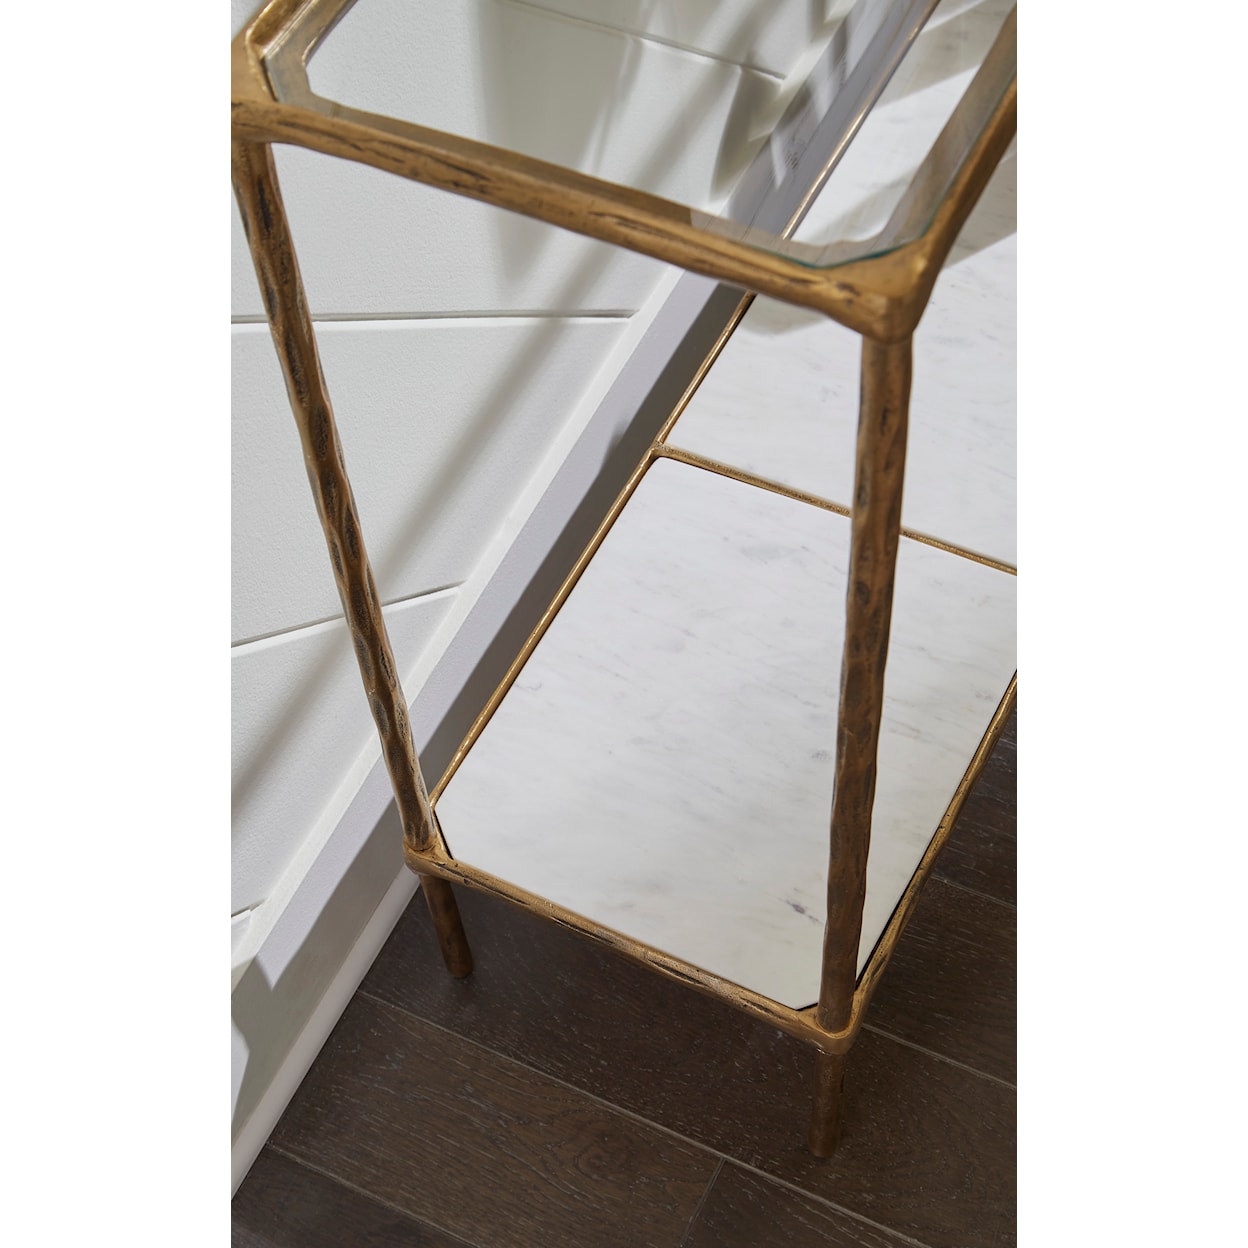 Signature Design by Ashley Antique Brass Console Table